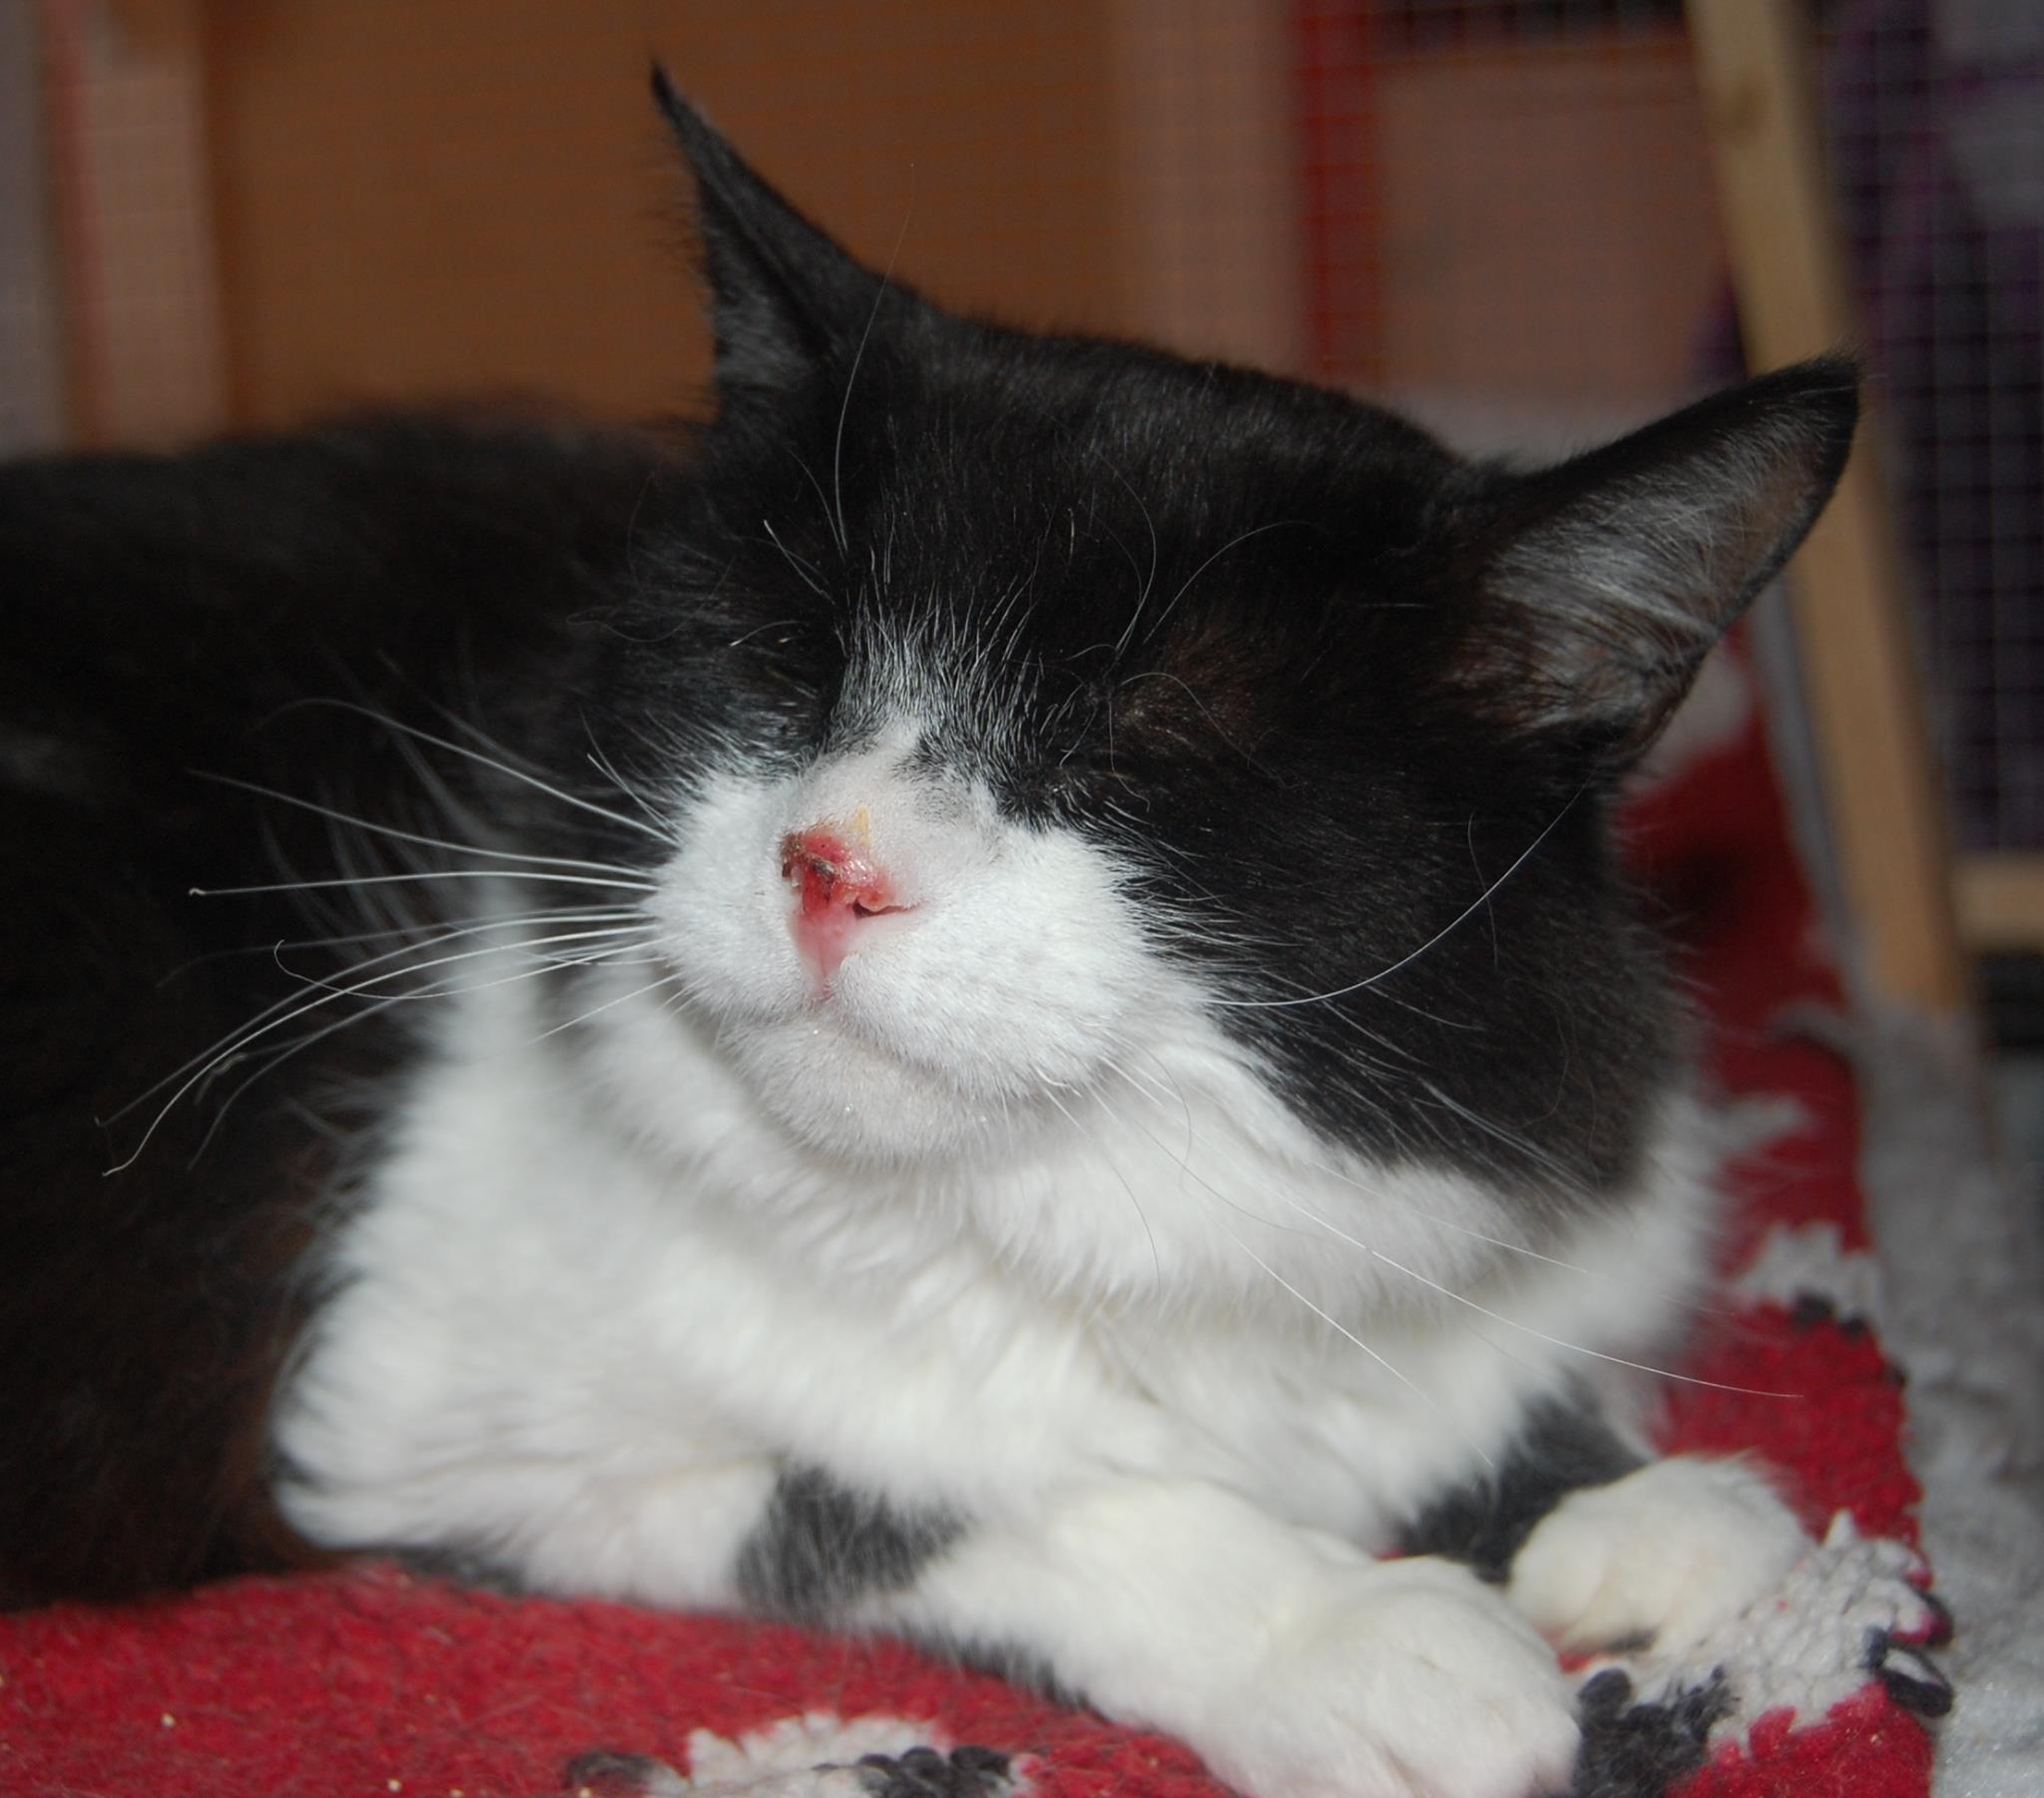 Photo of cat Duffy after she was deliberately burnt with a lighter. Her nose is blistered and sore.